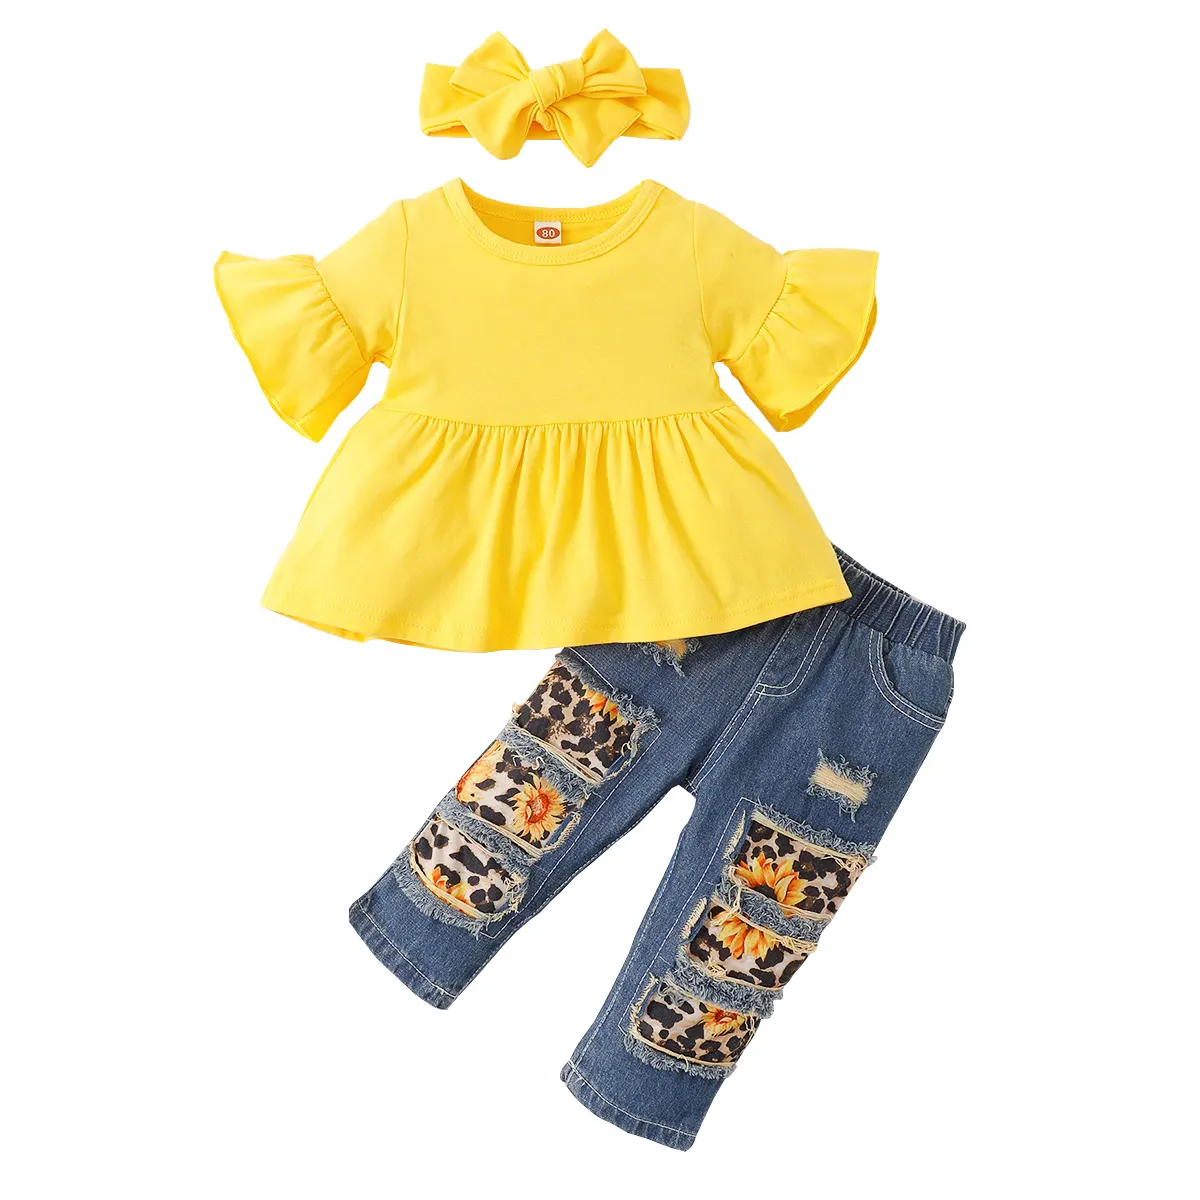 Girls Boutique Clothing Girls Clothing Sets Baby 3 Piece Girls Clothing Sets Cute